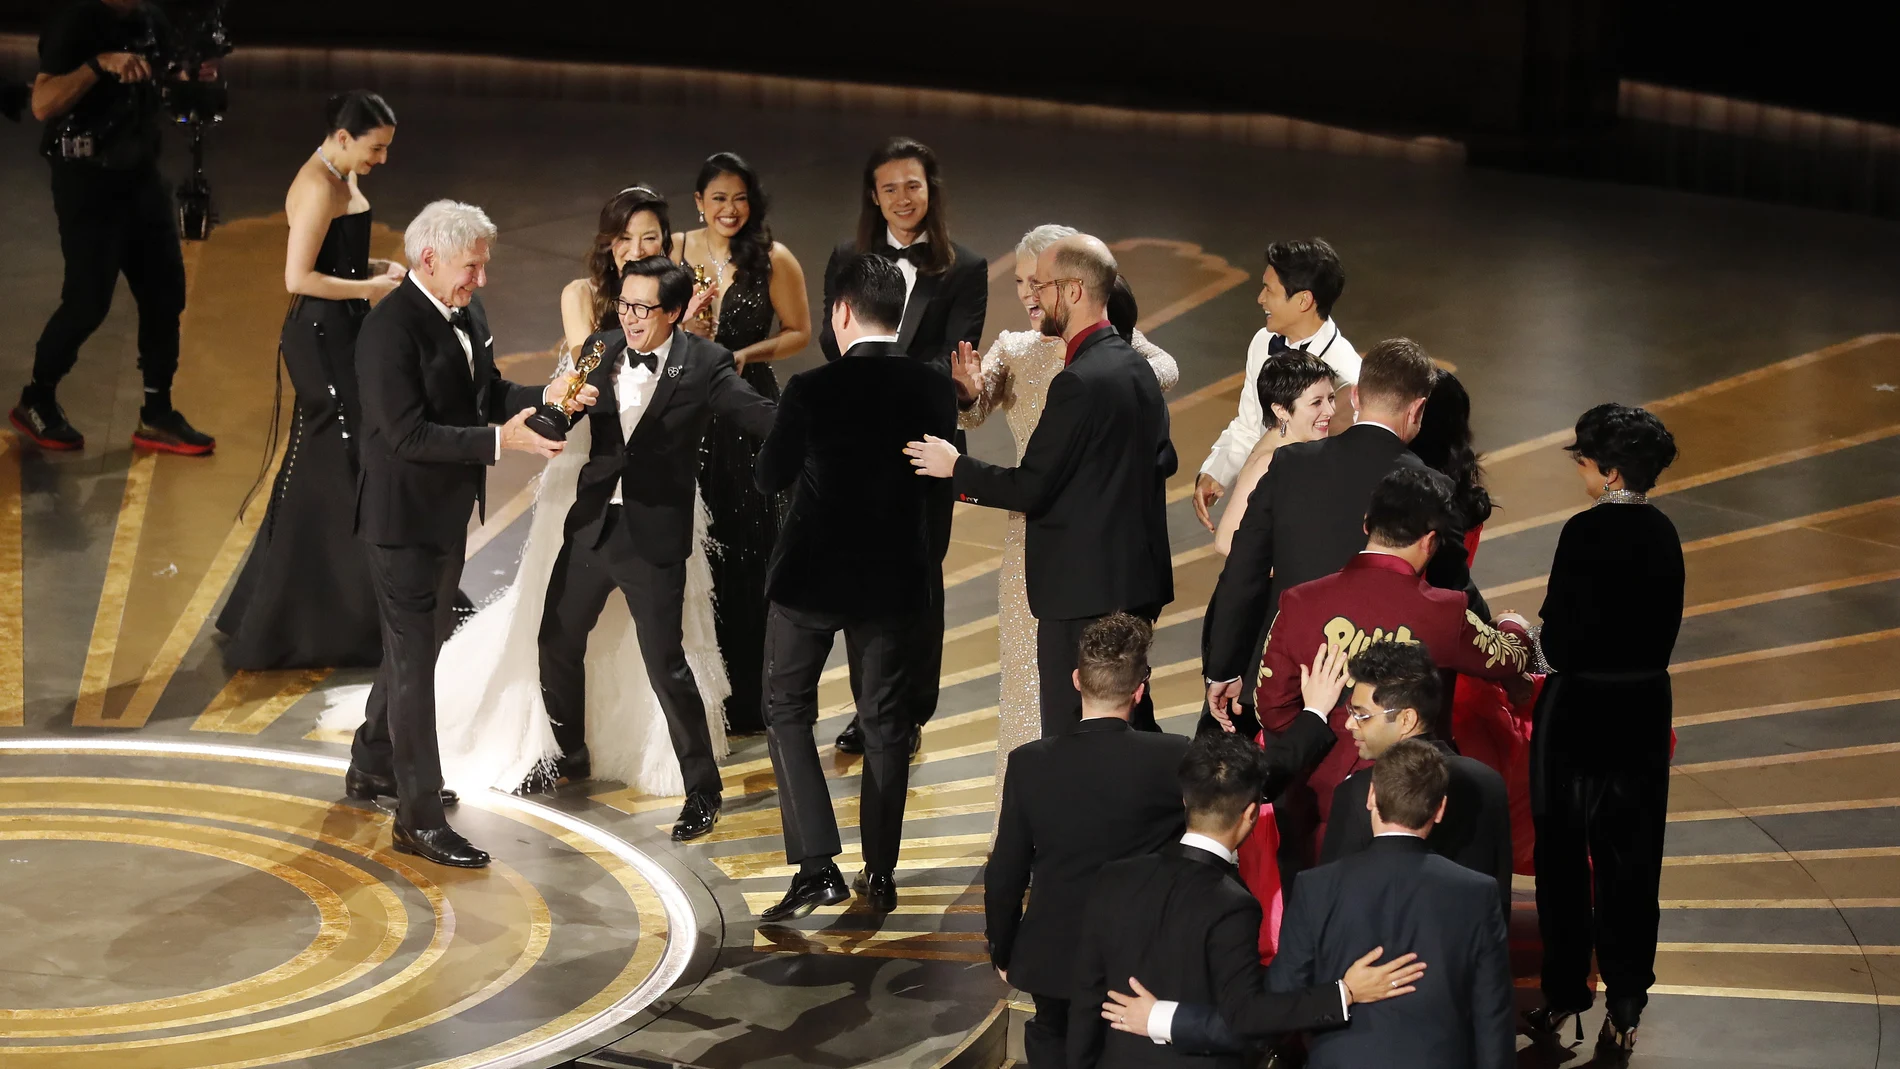 Jonathan Wang (C) and the cast and crew after winning the Oscar for Best Picture for 'Everything Everywhere All at Once' and Harrison Ford during the 95th annual Academy Awards ceremony at the Dolby Theatre in Hollywood, Los Angeles, California, USA, 12 March 2023. The Oscars are presented for outstanding individual or collective efforts in filmmaking in 24 categories. (Estados Unidos)